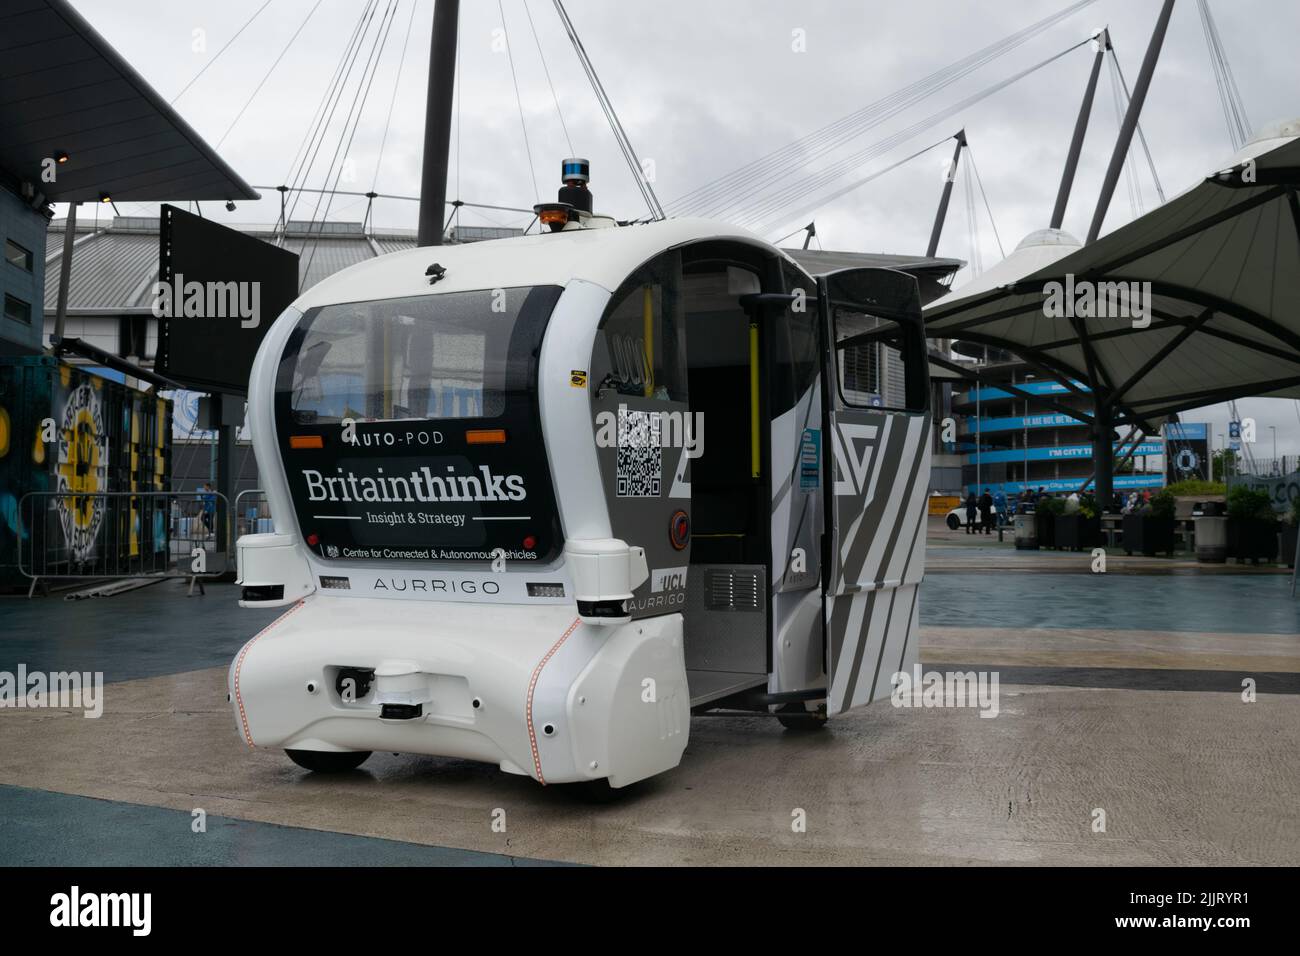 tihad Campus. Driverless white car in rain with text Centre for Connected and Autonomous Vehicles. Sensor shielded from rain. Manchester UK. Stock Photo